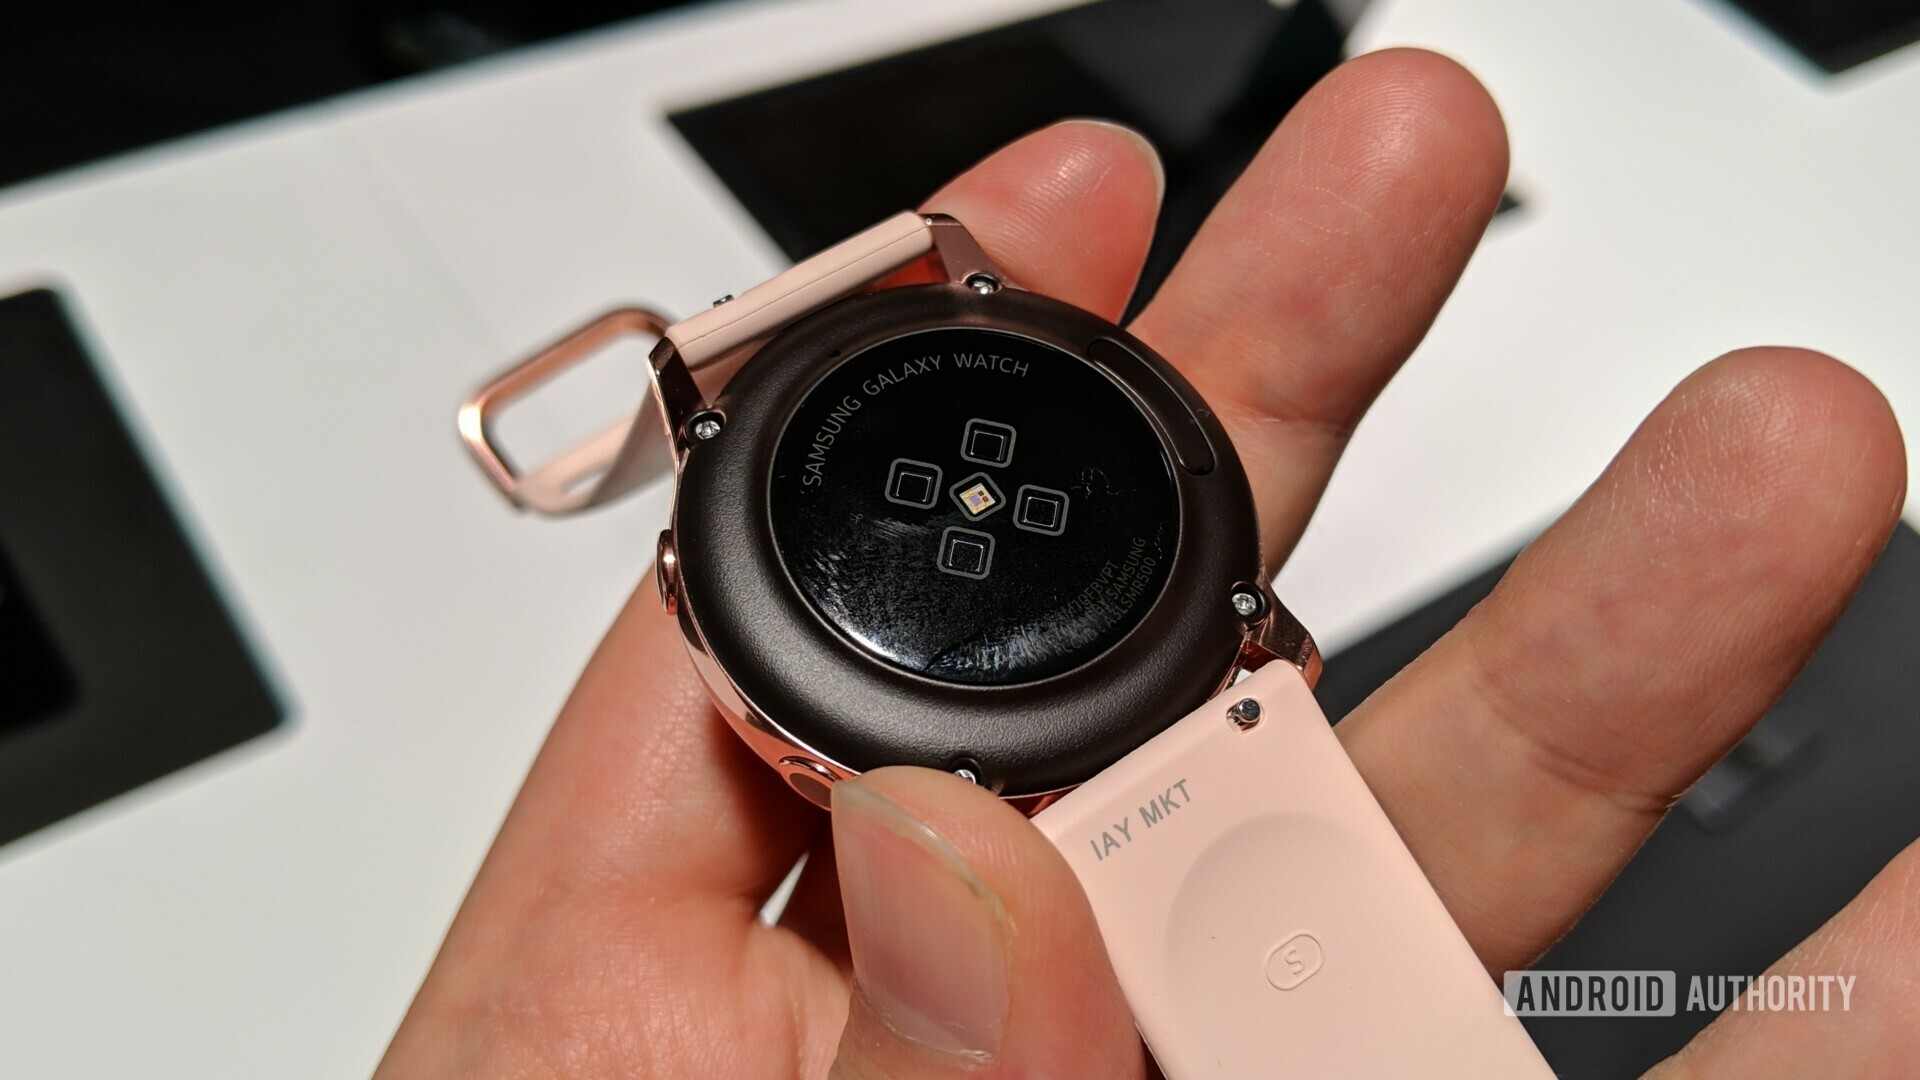 Photo of the heart rate sensor on the Samsung Galaxy Watch Active.